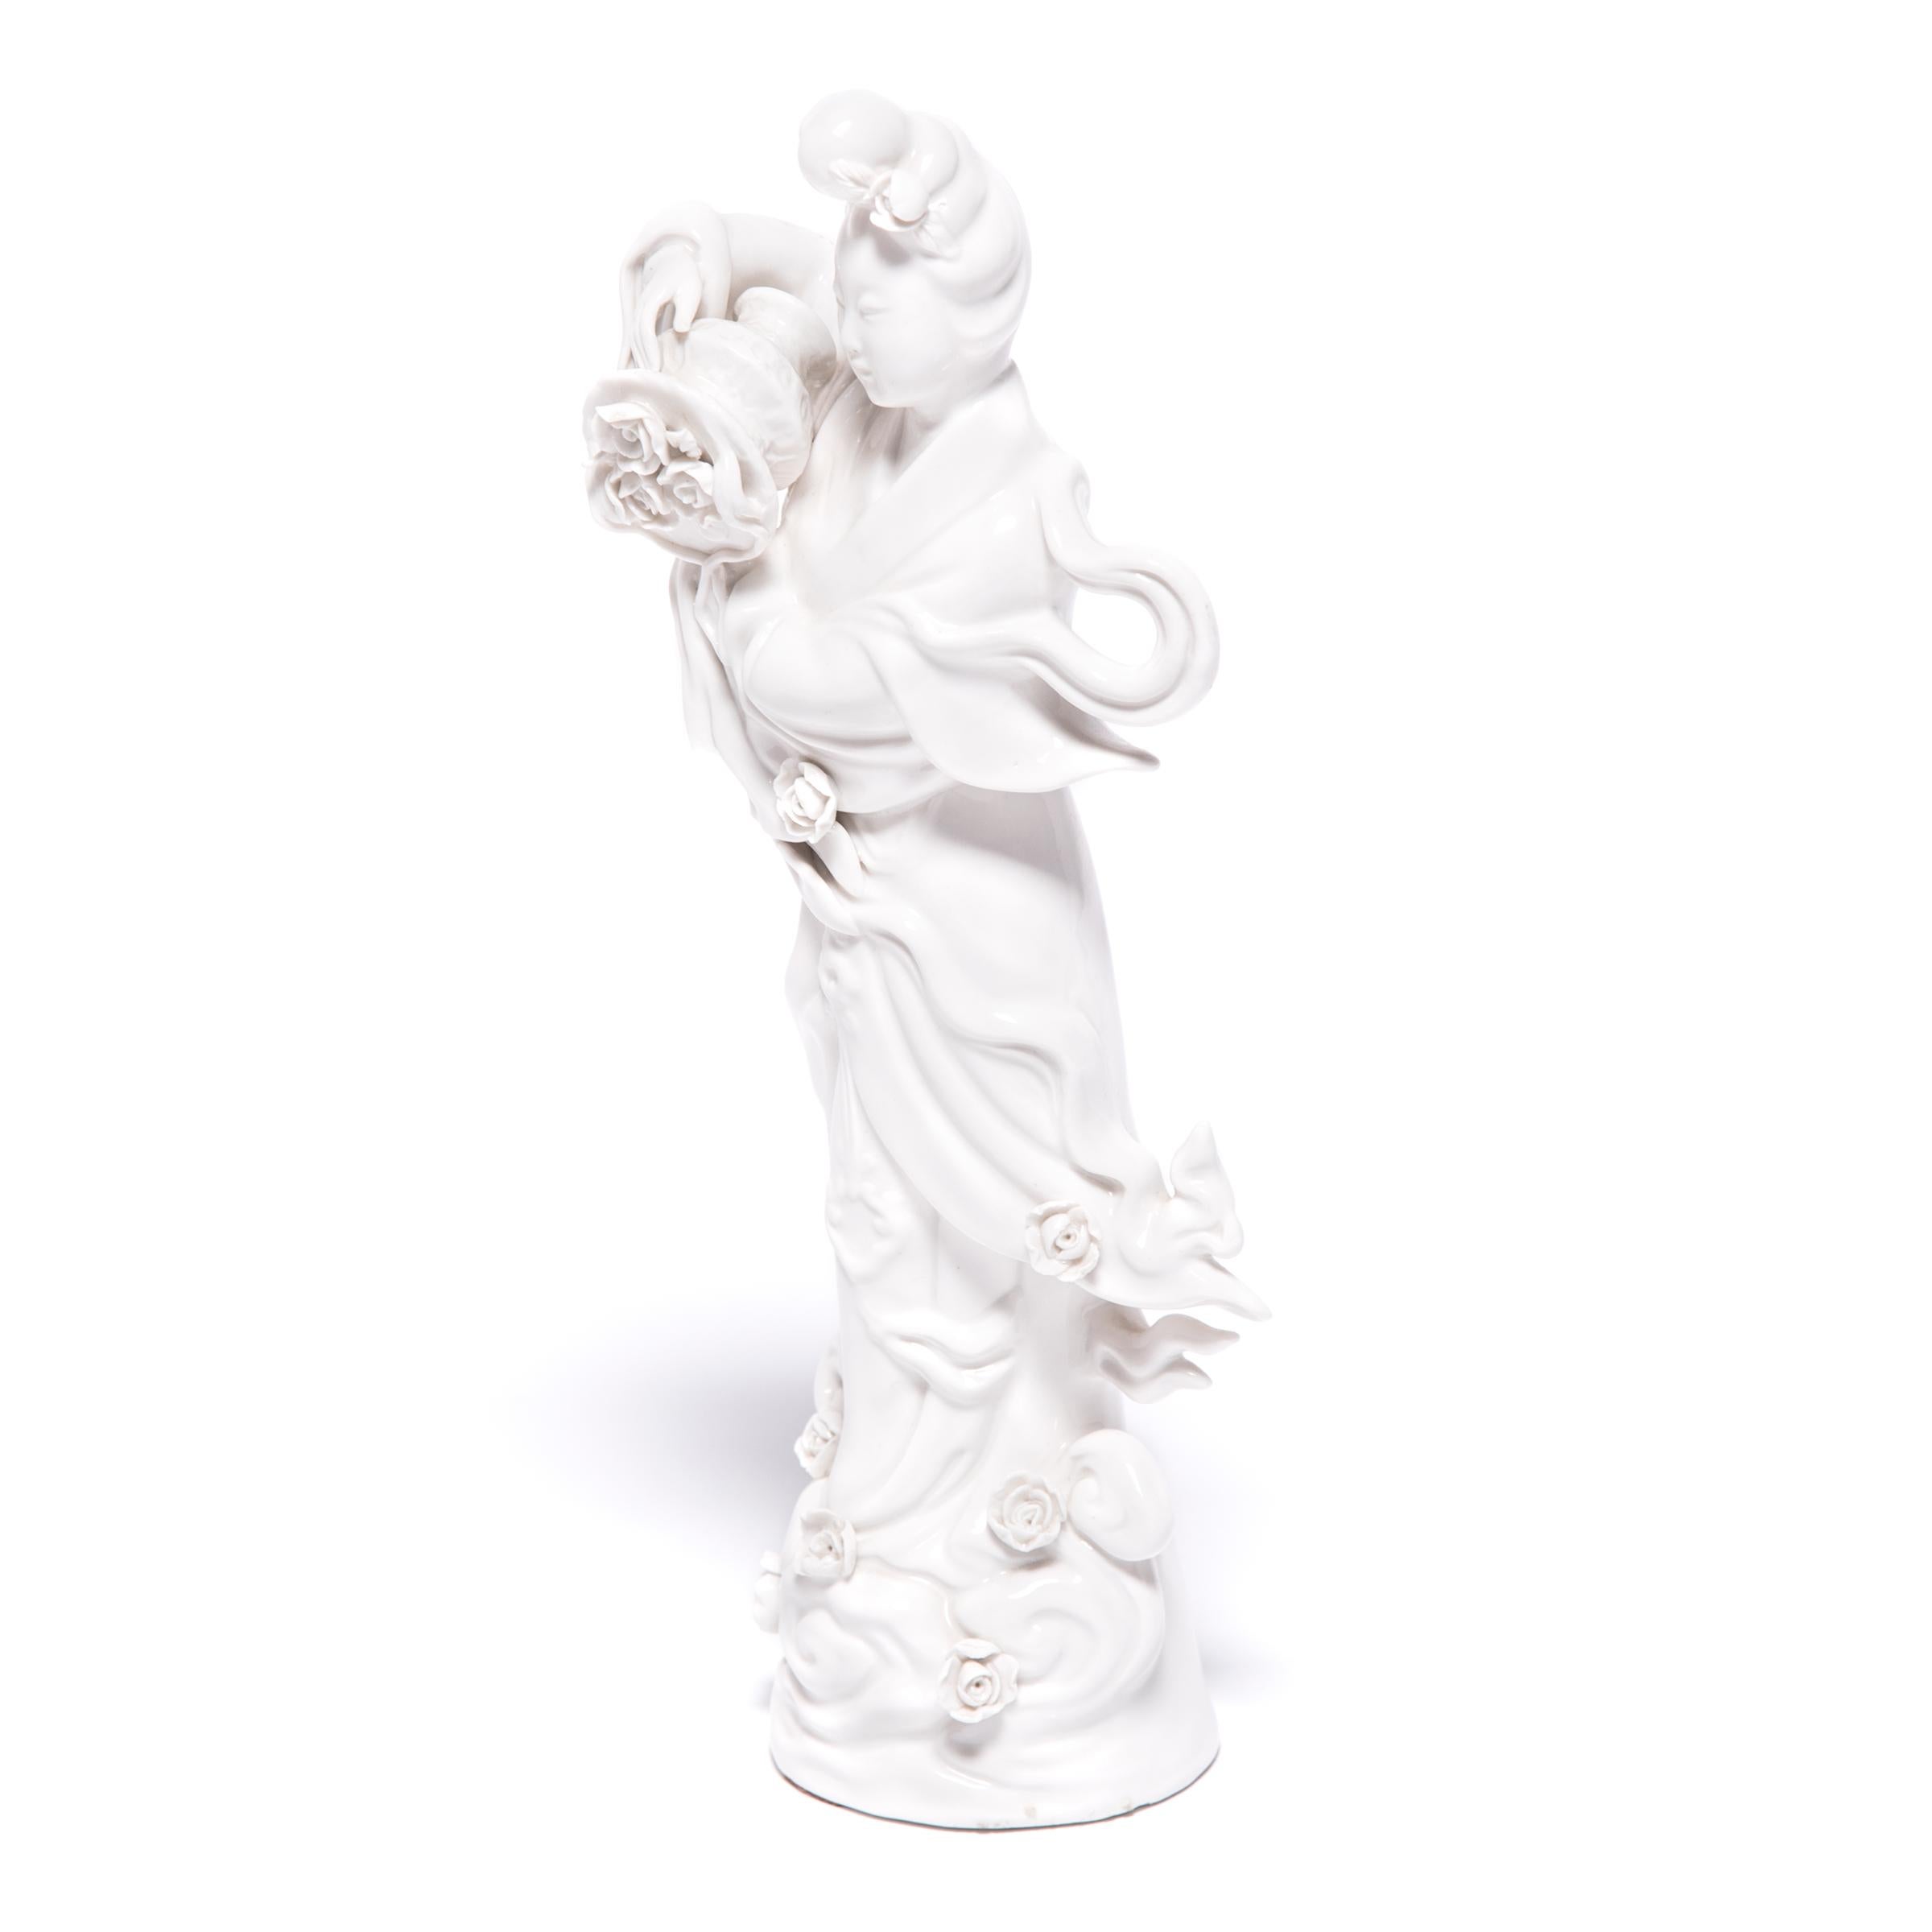 A symbol of compassion and wisdom, Guan Yin is a bodhisattva venerated by Buddhists and Taoists alike. This exquisite porcelain sculpture from circa 1900 depicts the serene-faced goddess spilling roses from a basket, with blossoms cascading down her